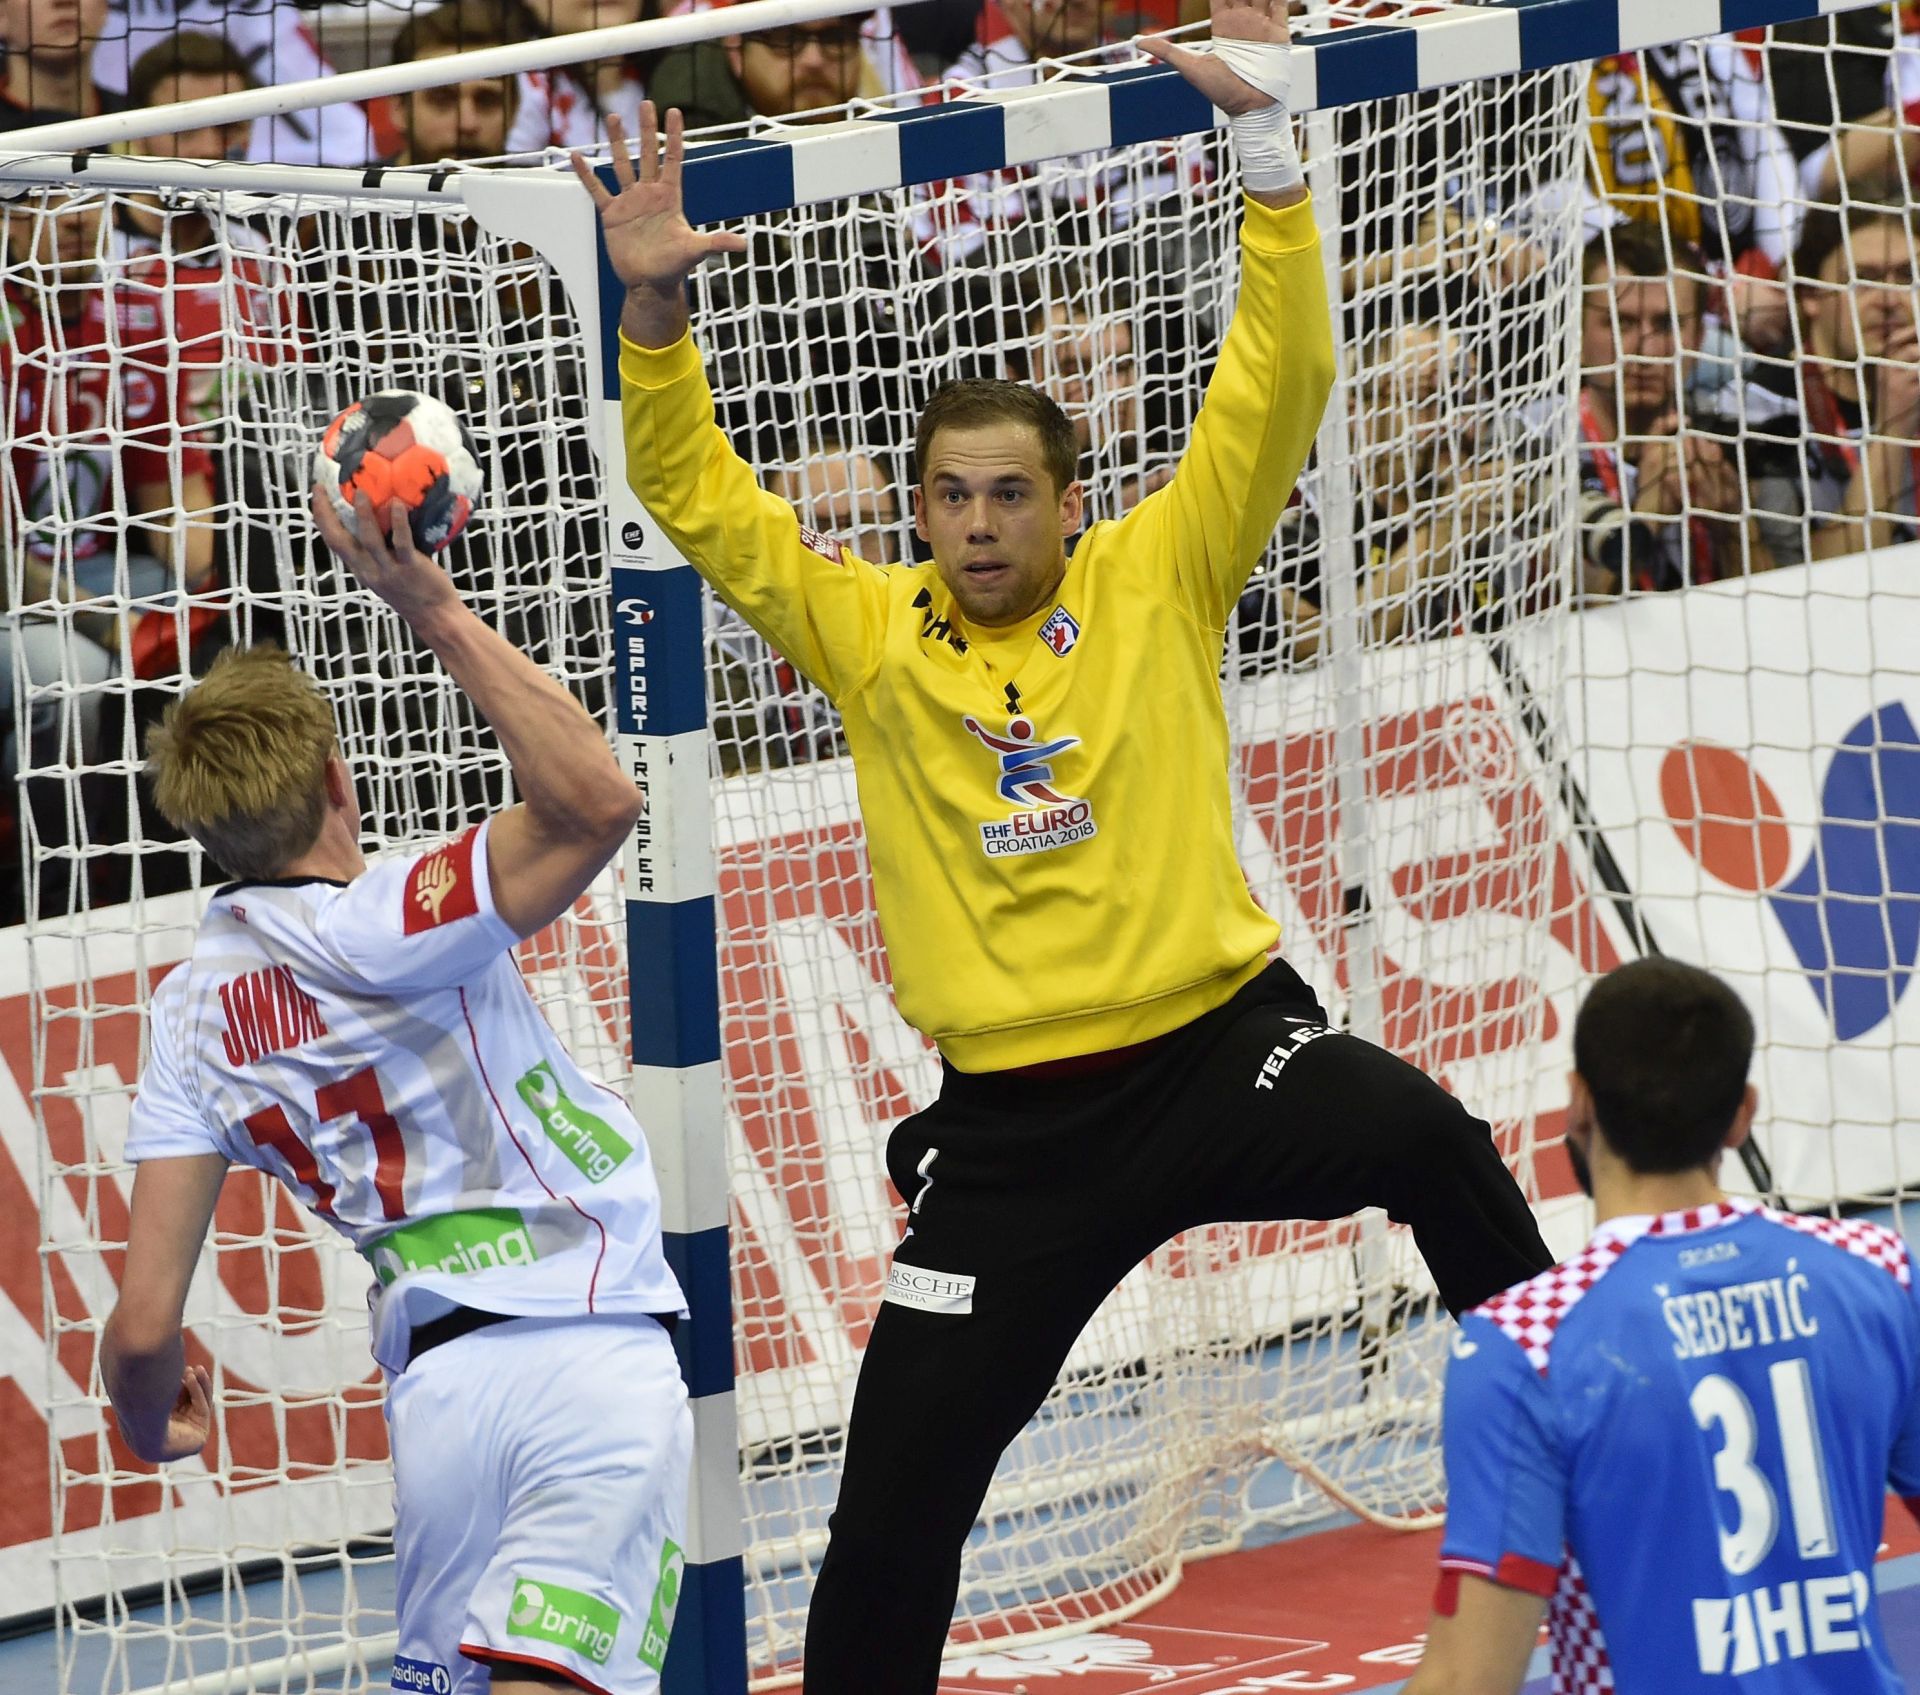 epa05137206 Magnus Jondal (L) of Norway in action against goalkeeper Ivan Stevanovic (C) of Croatia during the 2016 European Men's Handball Championship third place game between Norway and Croatia at the Tauron Arena in Krakow, Poland, 31 January 2016.  EPA/JACEK BEDNARCZYK POLAND OUT